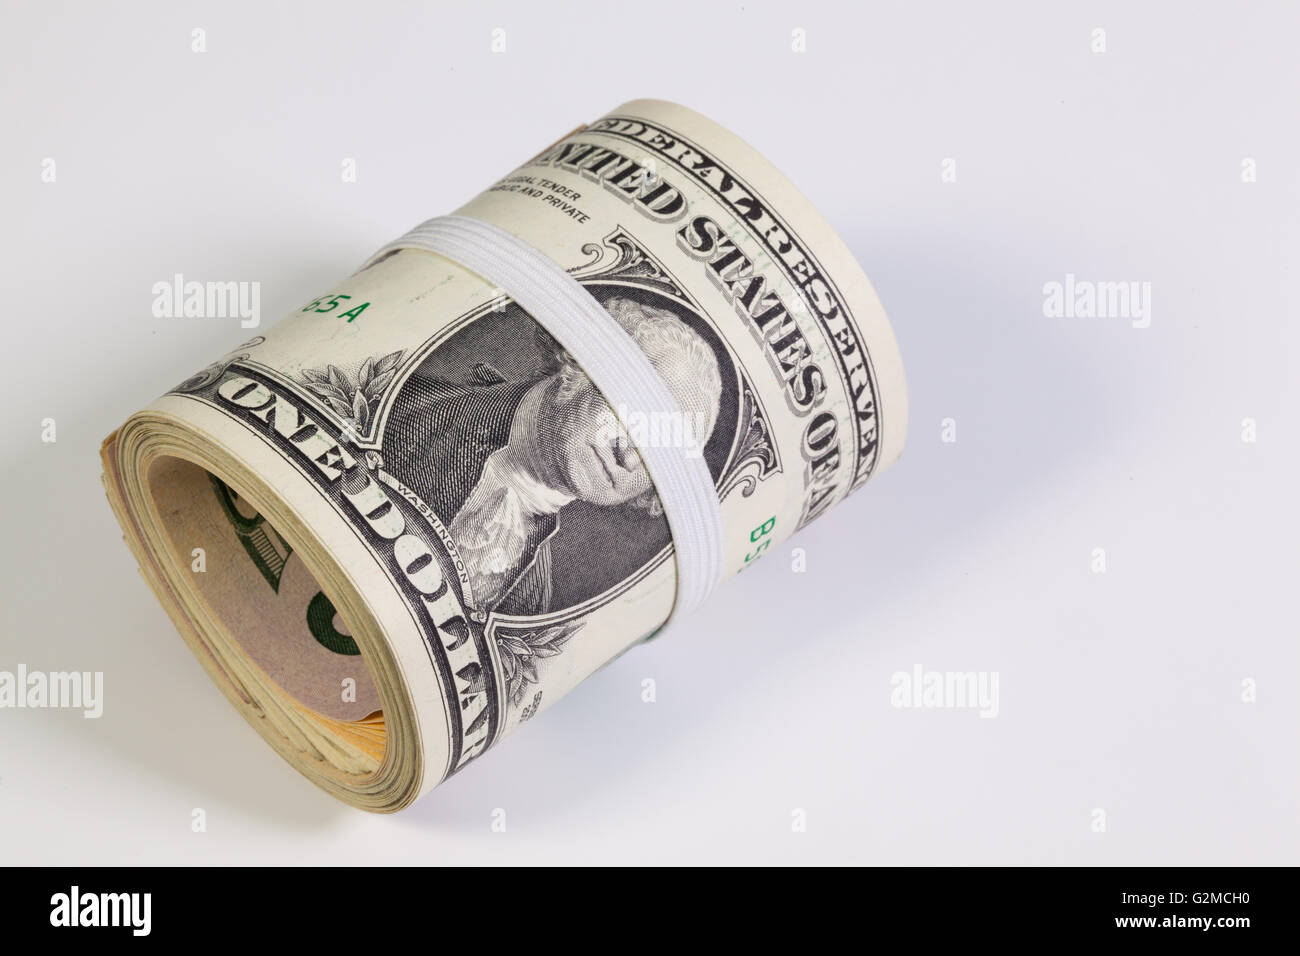 Bribery - The roll of dollar bills with plastic band over the eyes Stock Photo